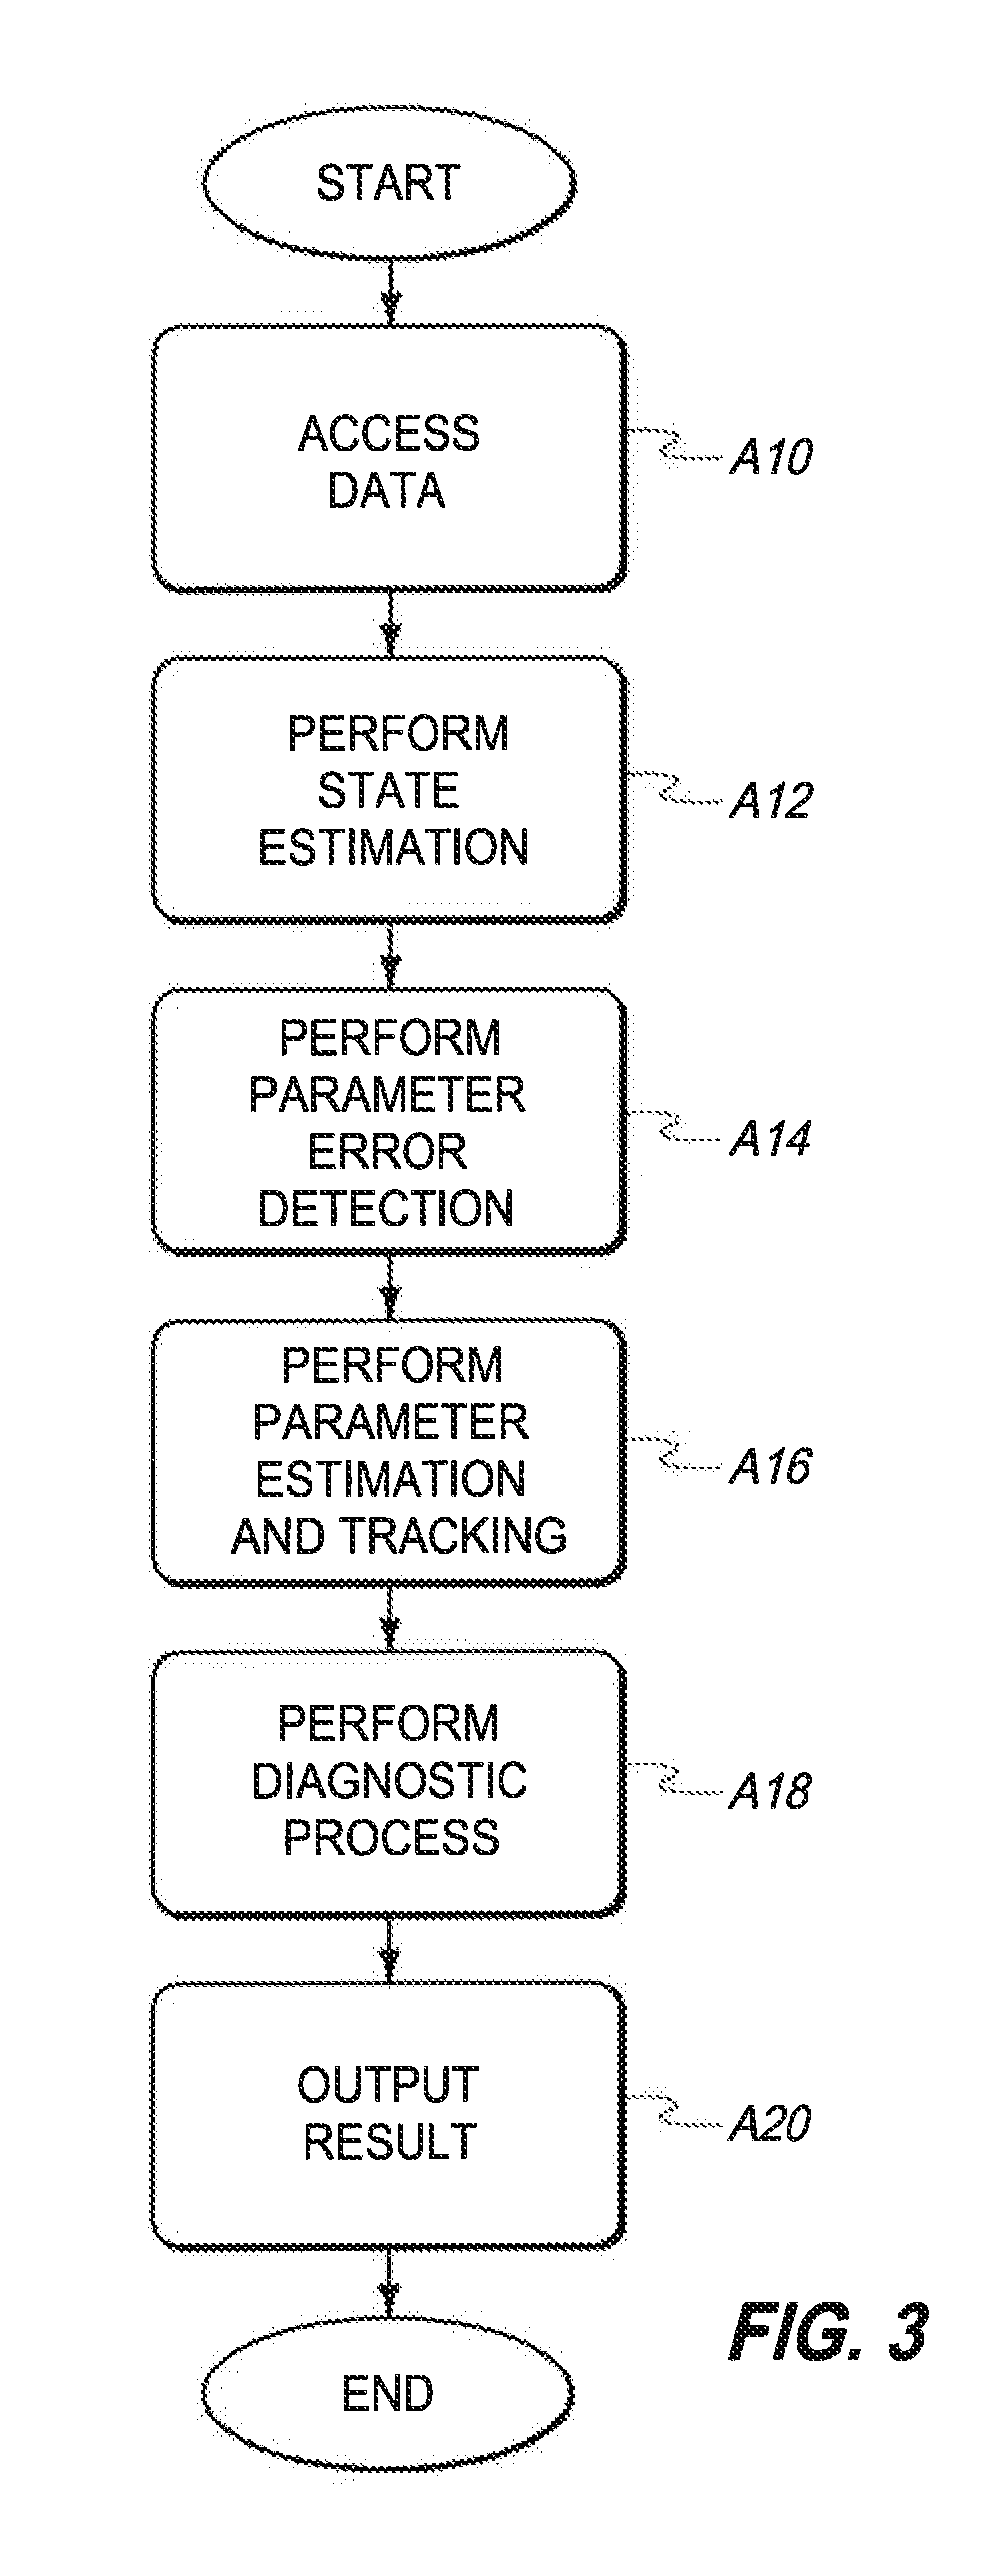 Electrical Power Grid Monitoring Apparatus, Articles of Manufacture, and Methods of Monitoring Equipment of an Electrical Power Grid